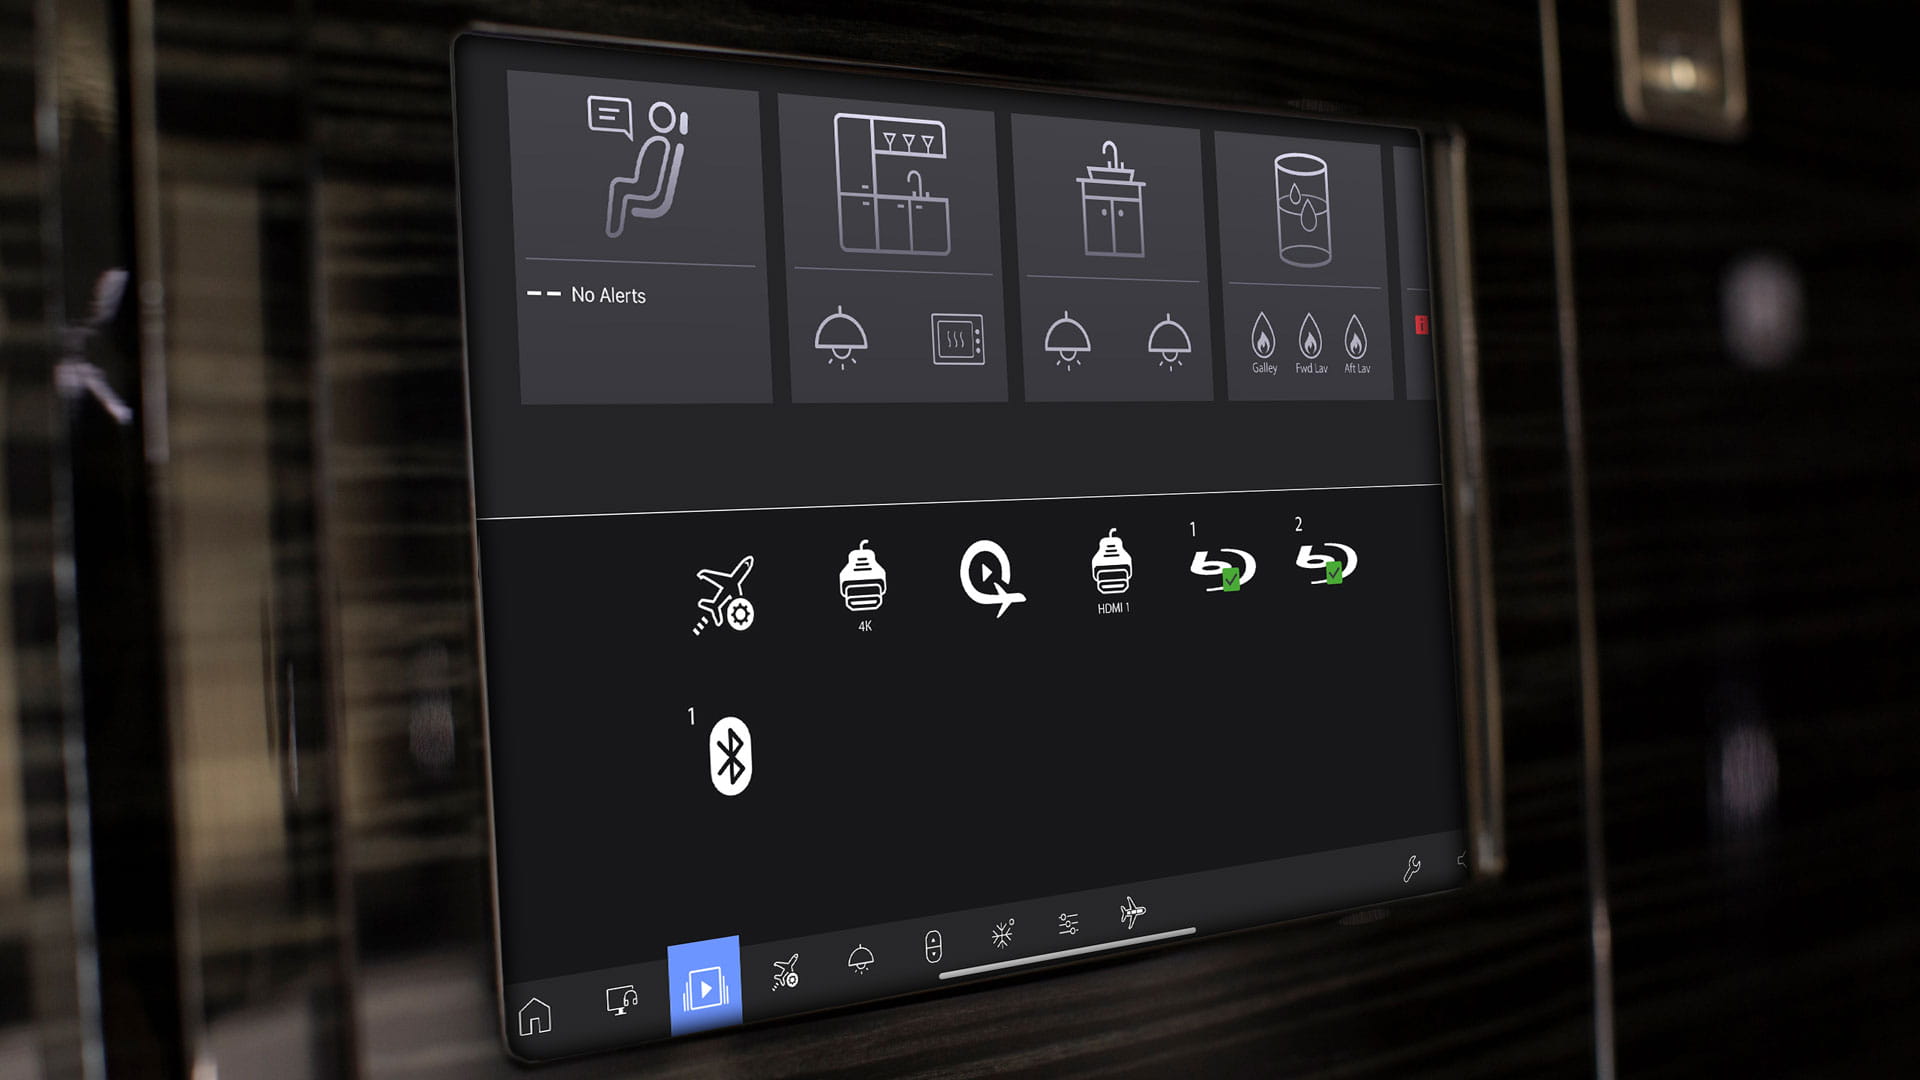 A tablet graphical user interface (GUI) for a business jet galley